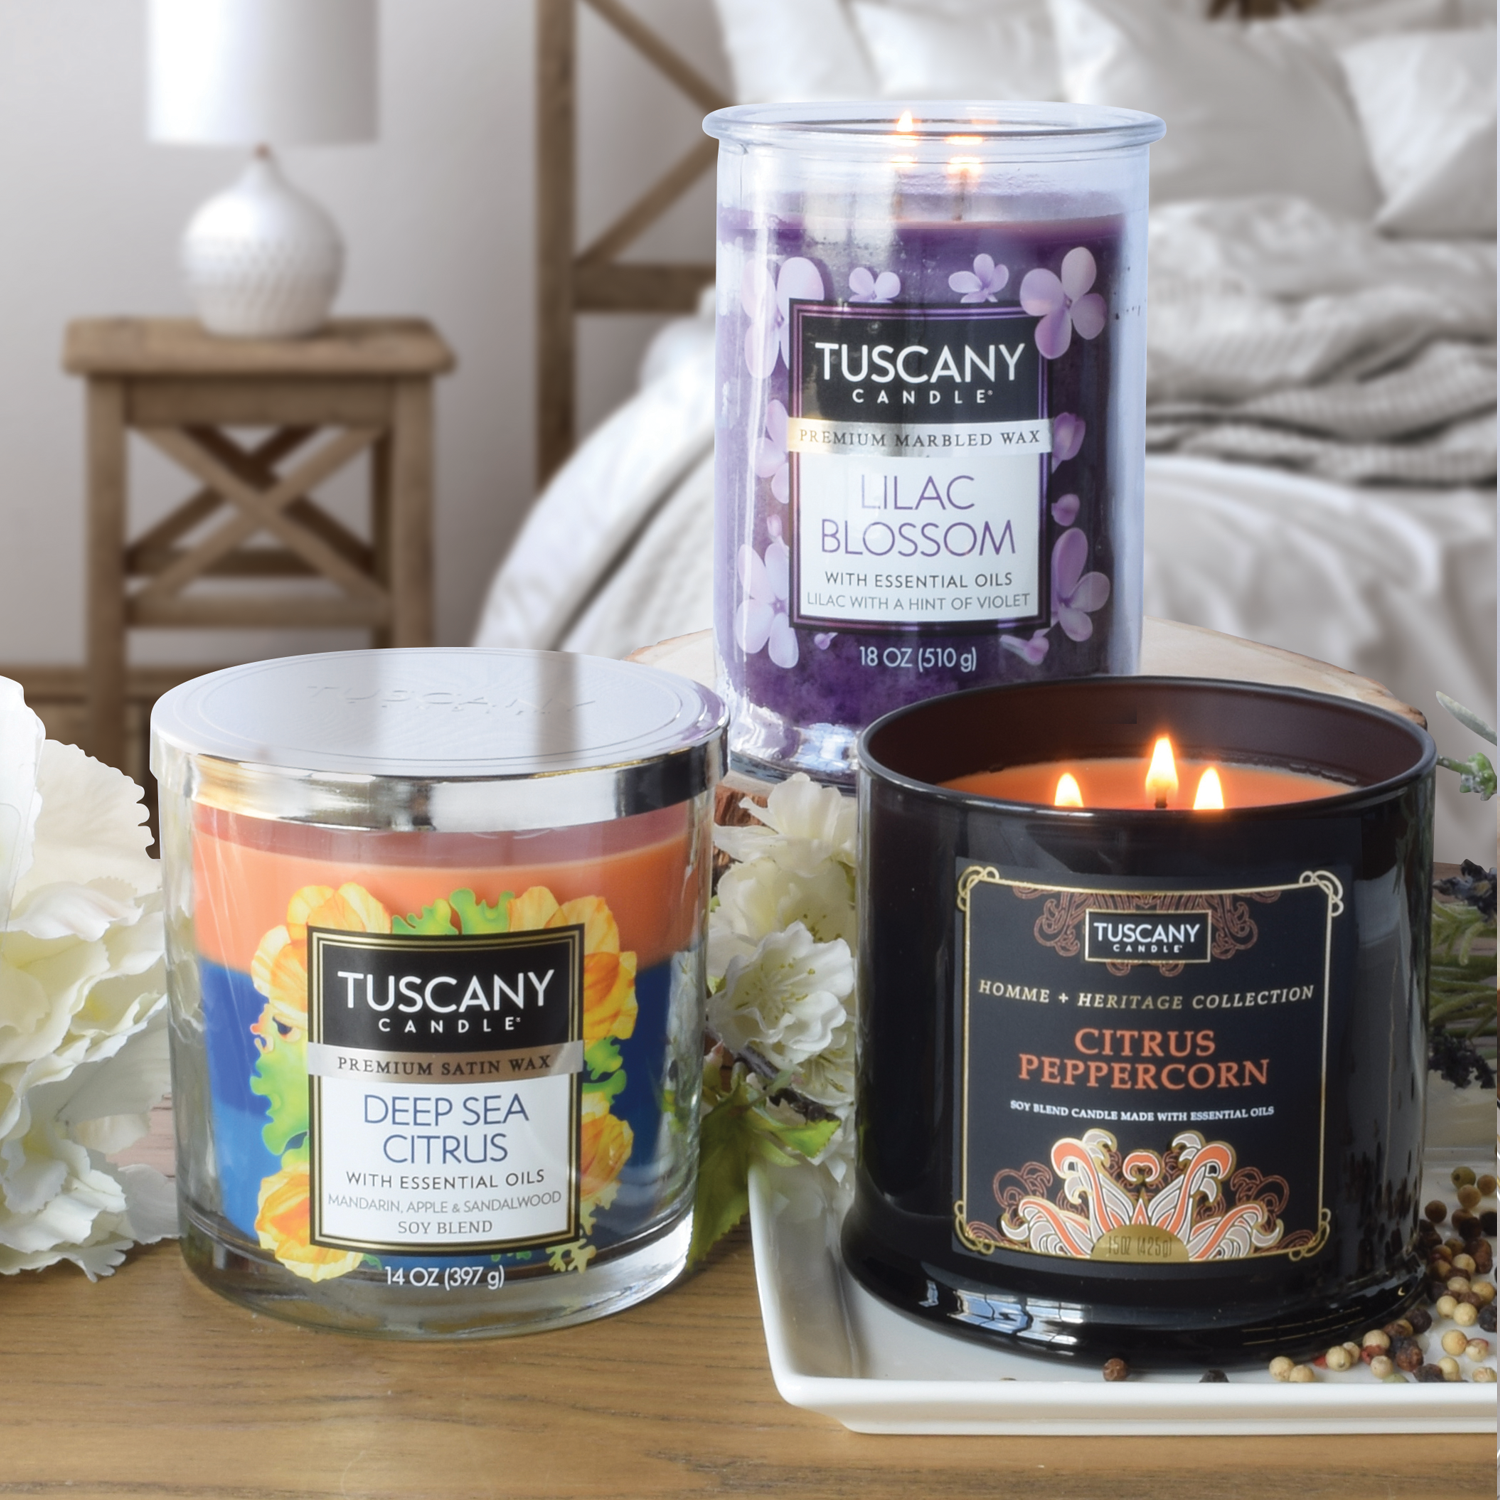 More Hot Tips: Candle Care & Safety